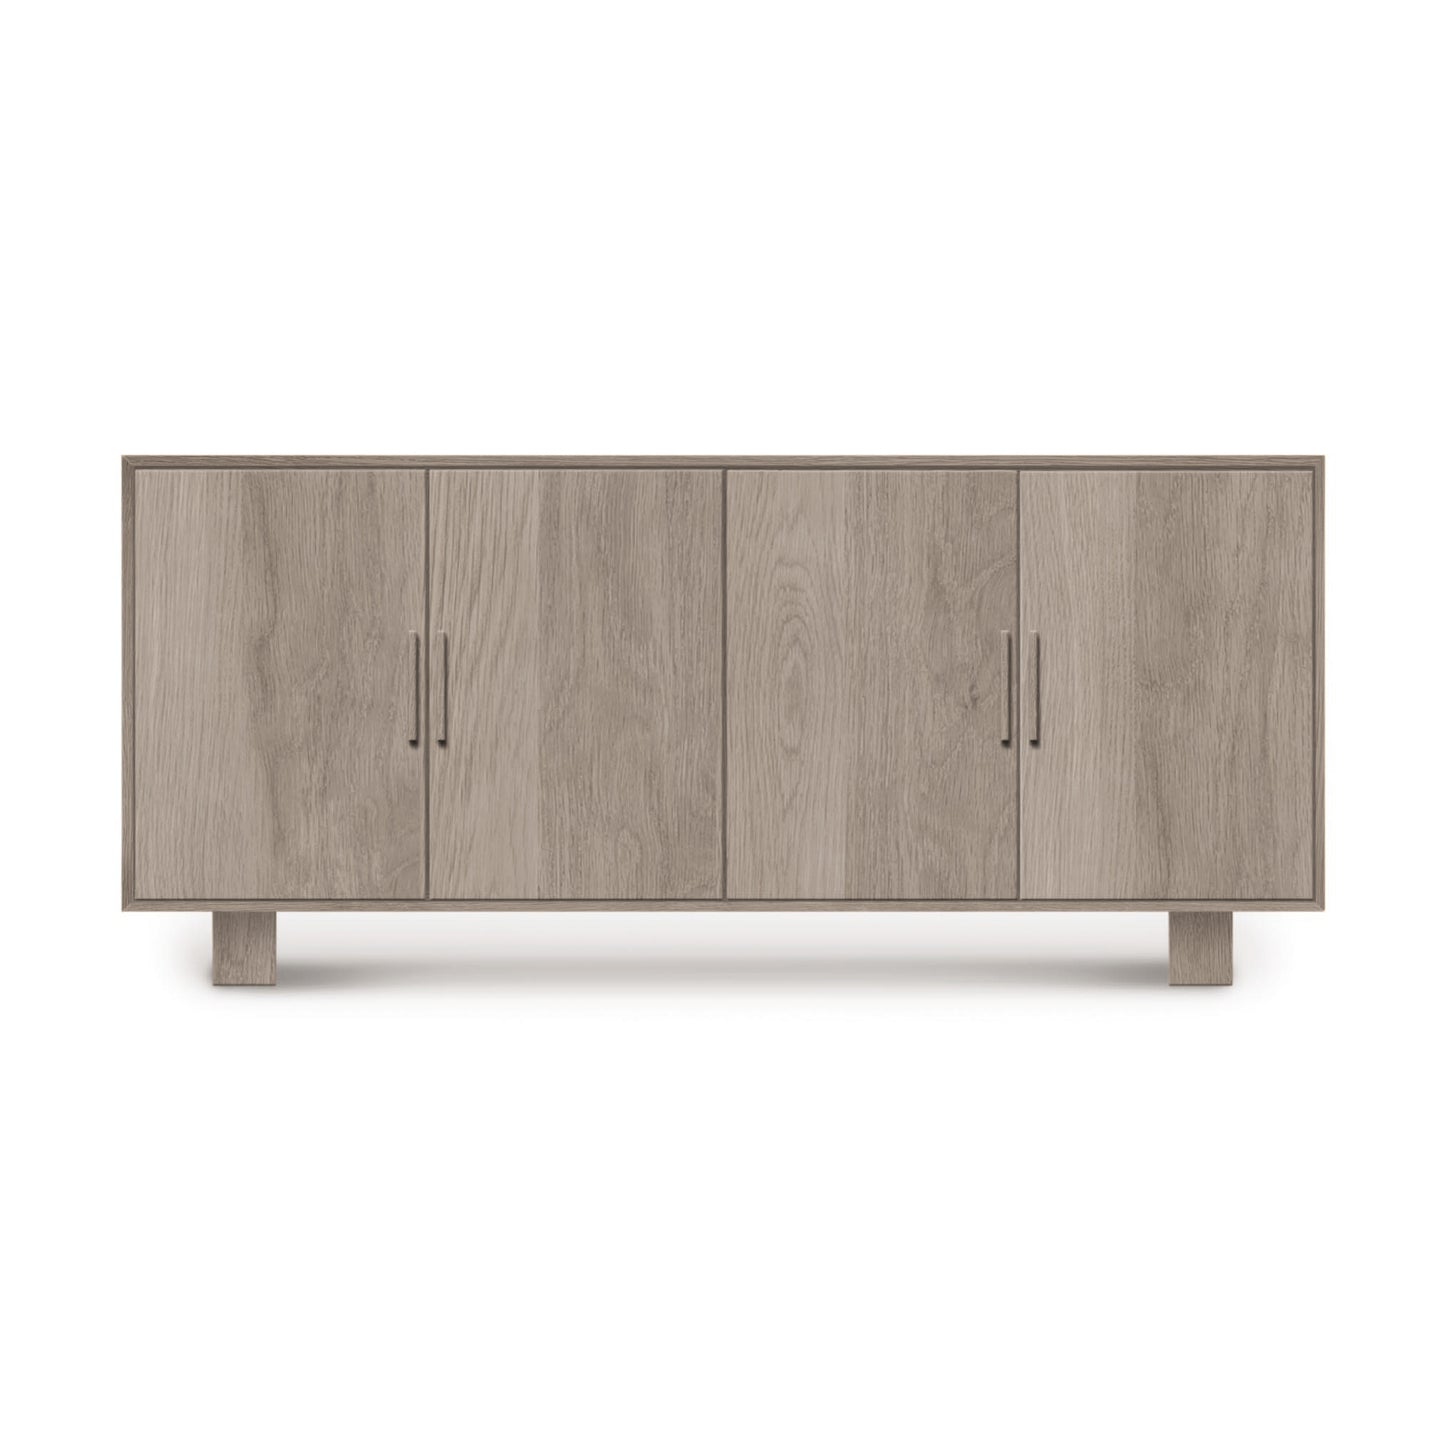 Mid-century modern Copeland Furniture Iso 4-Door Buffet with four doors and short legs, isolated on a white background.